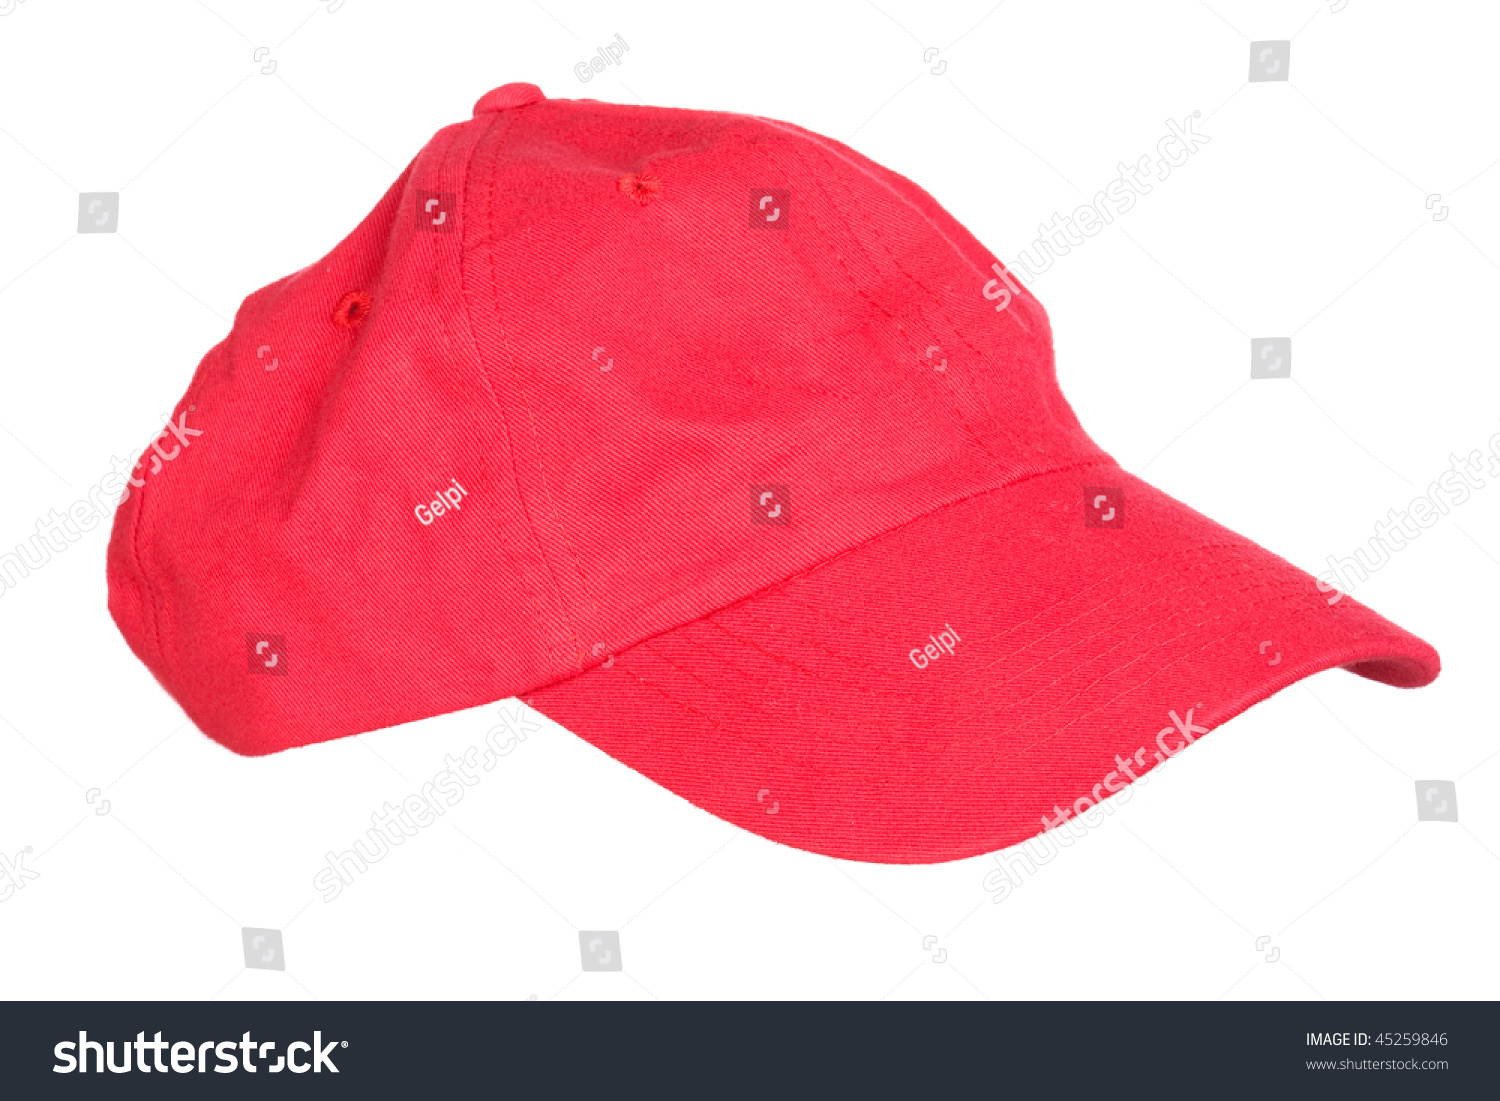 Red Cap Isolated On Over White Stock Photo 45259846 - Shutterstock